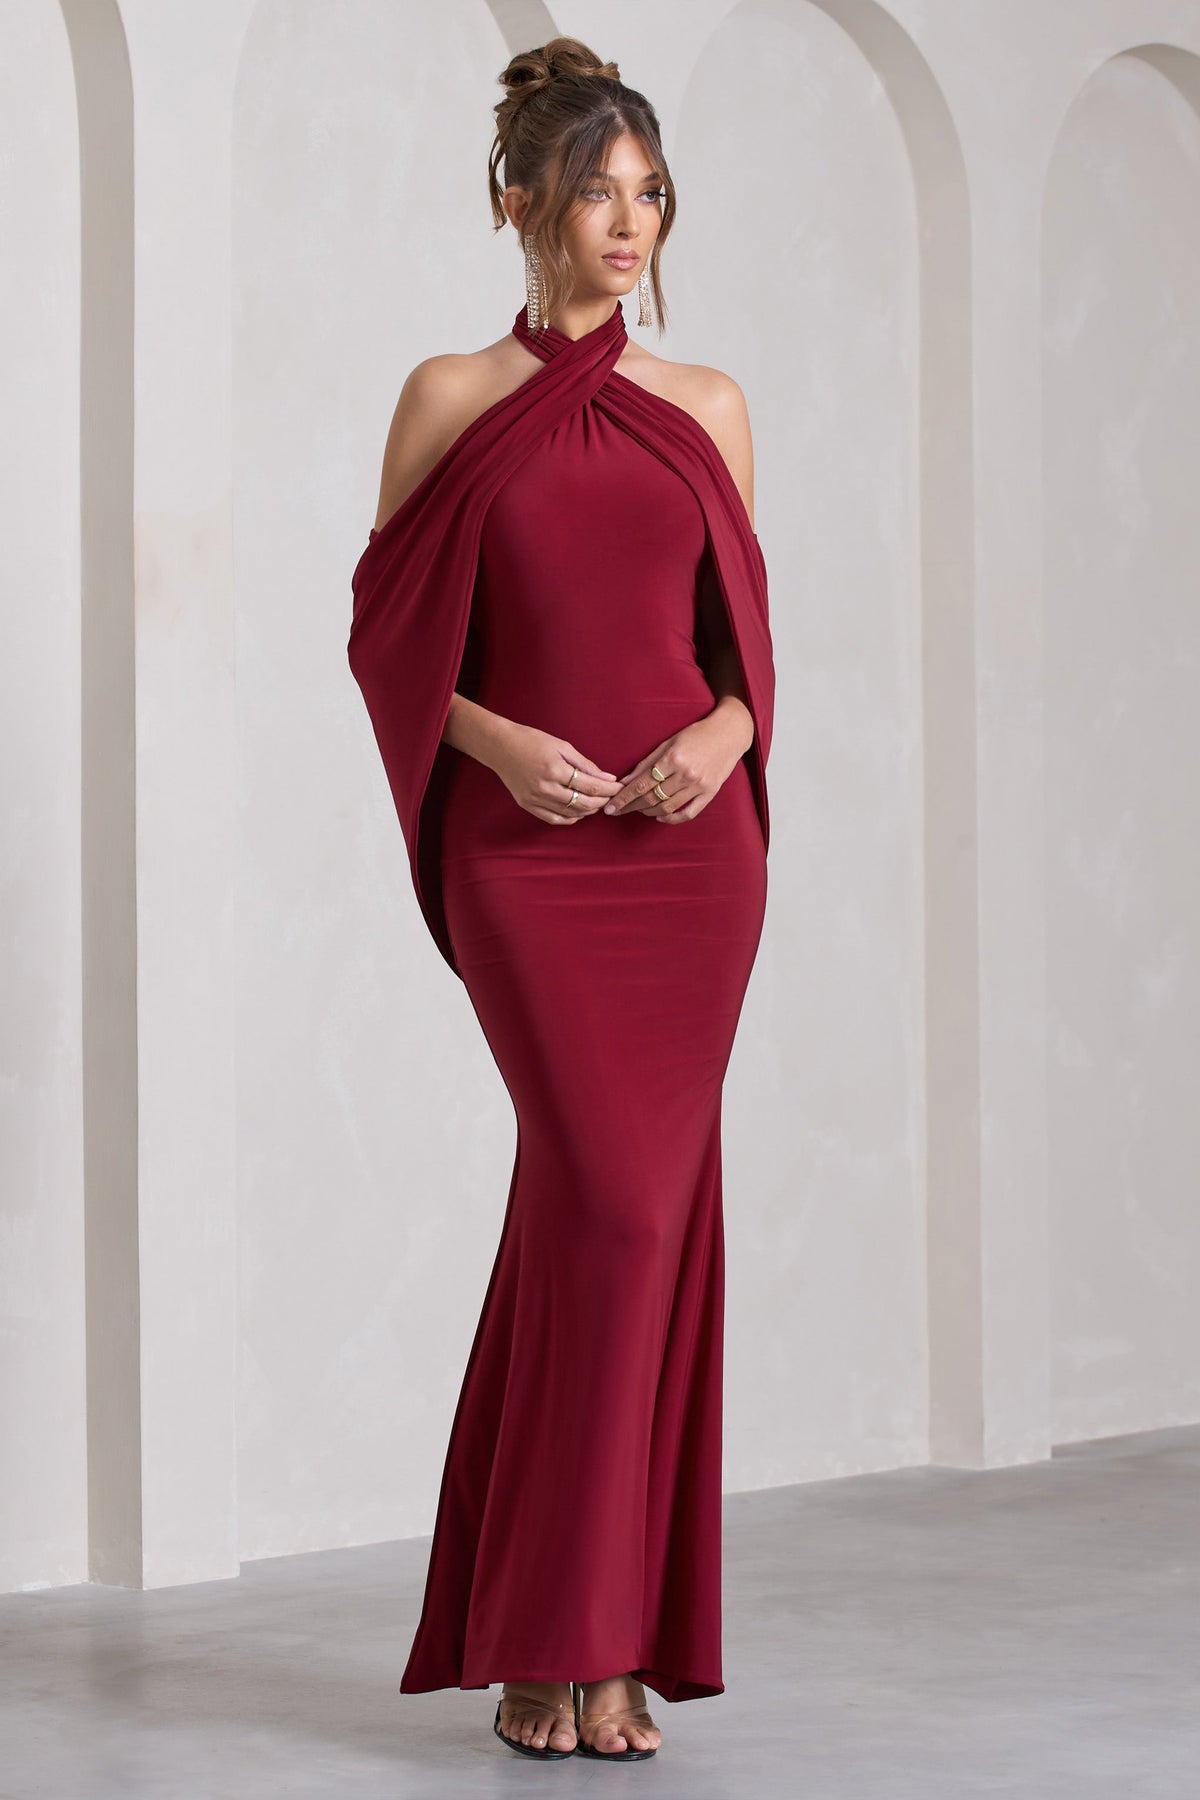 Revelation Berry Red Crossed London USA - Halter-Neck Fishtail – Cape L Club Dress Maxi With